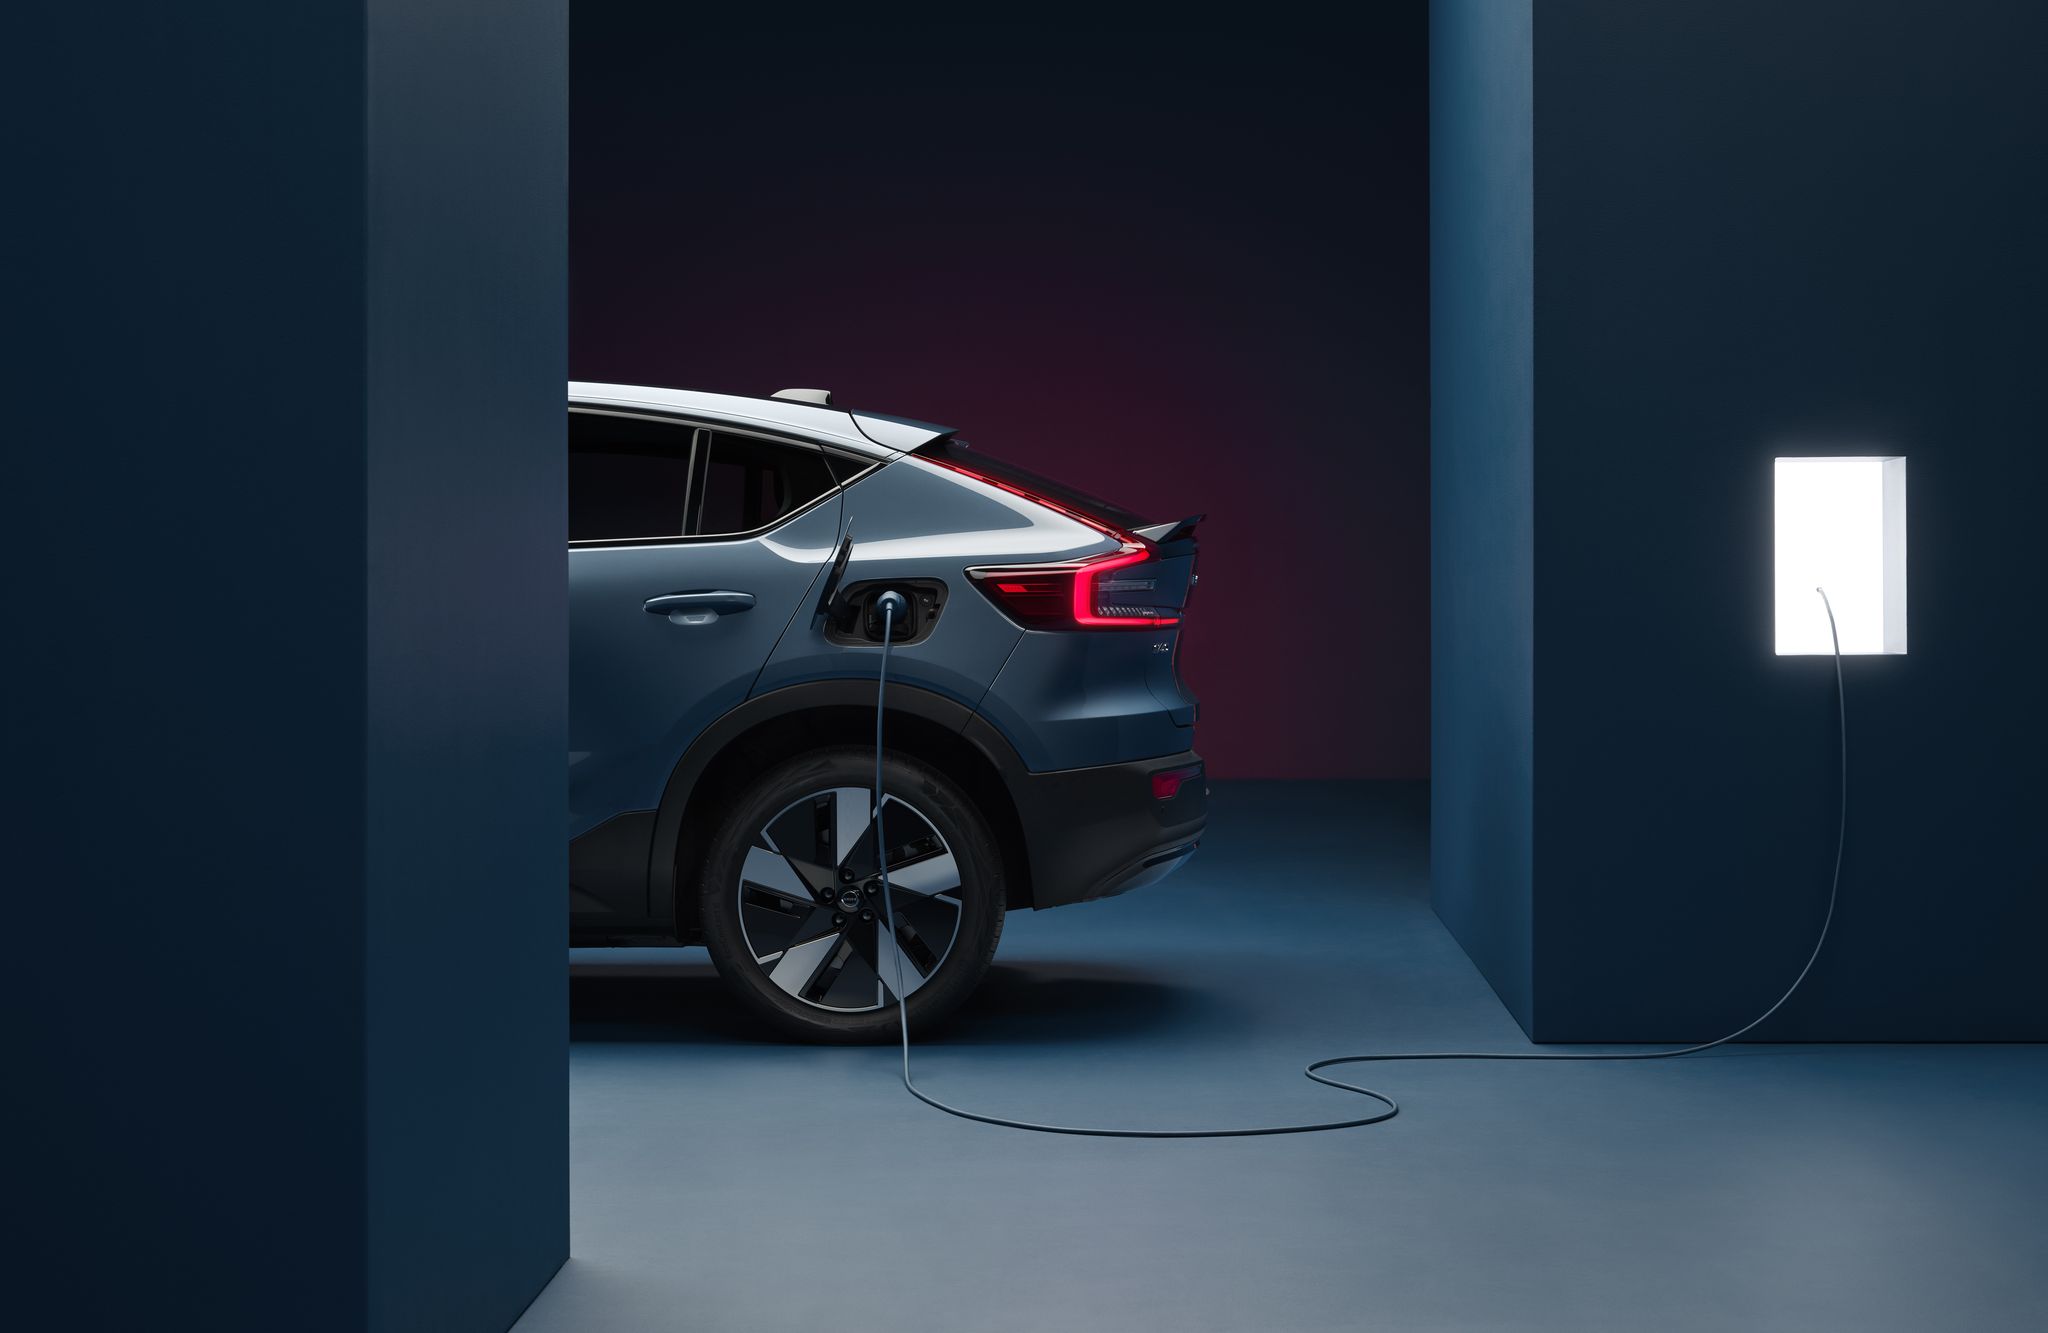 Recharging a plugged-in Volvo C40